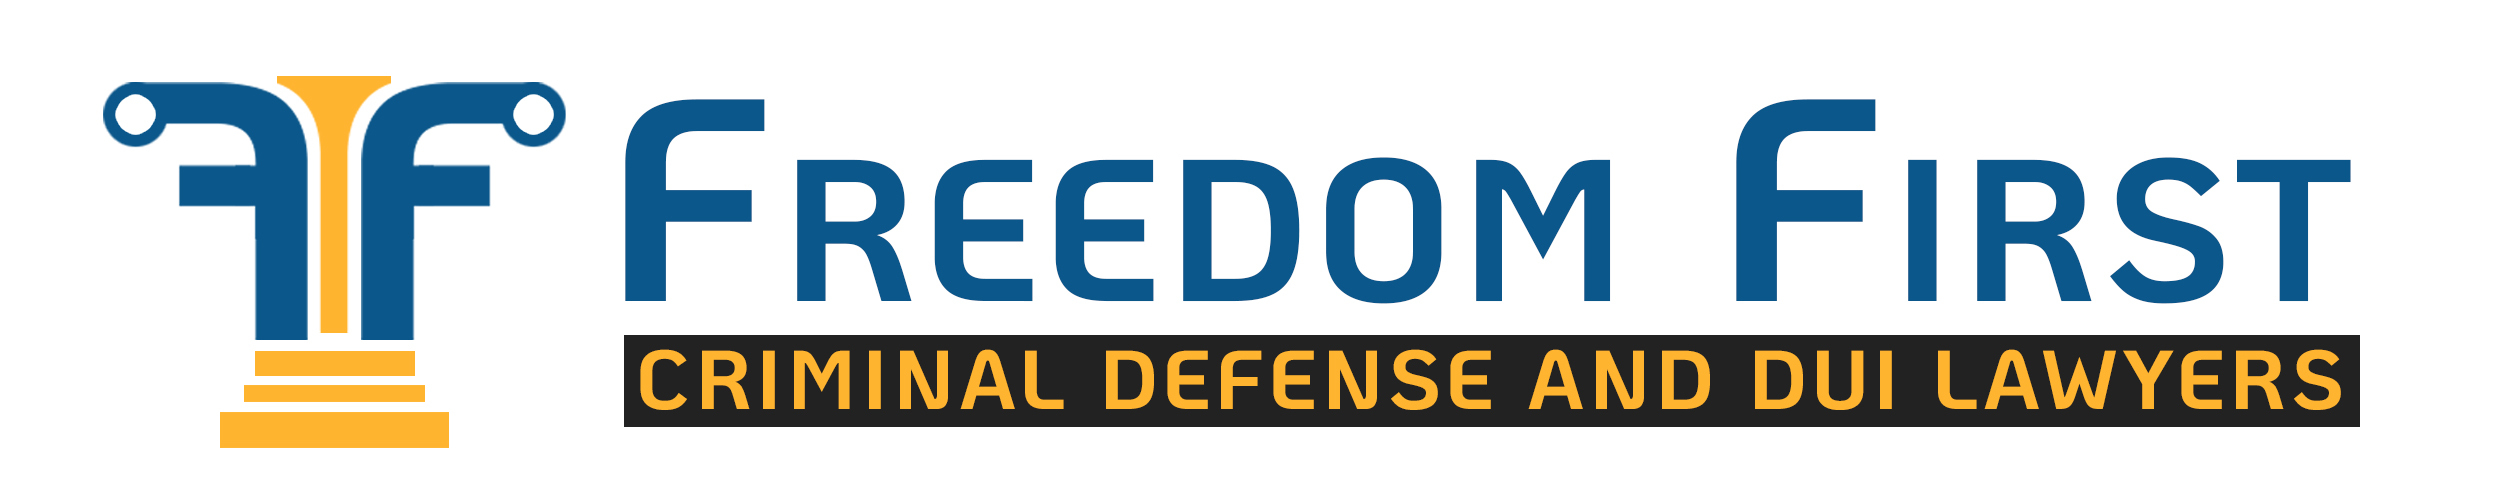 Freedom-First-Criminal-Defense-and-DUI-Lawyers-Logo-1.jpg